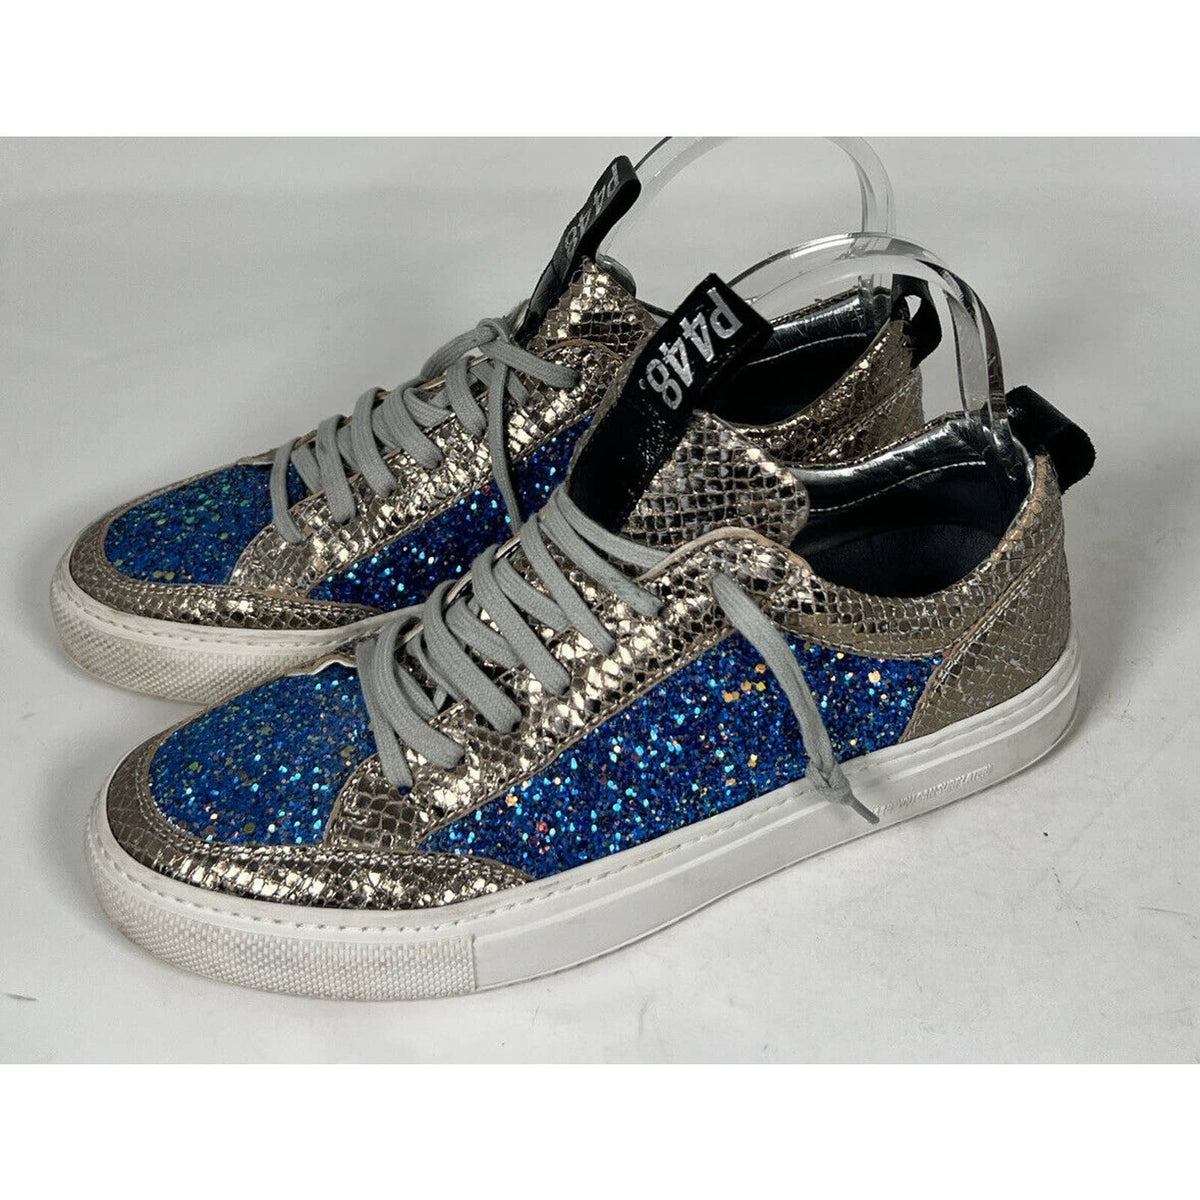 P448 Womens Blue and Silver Sneakers Sz.40